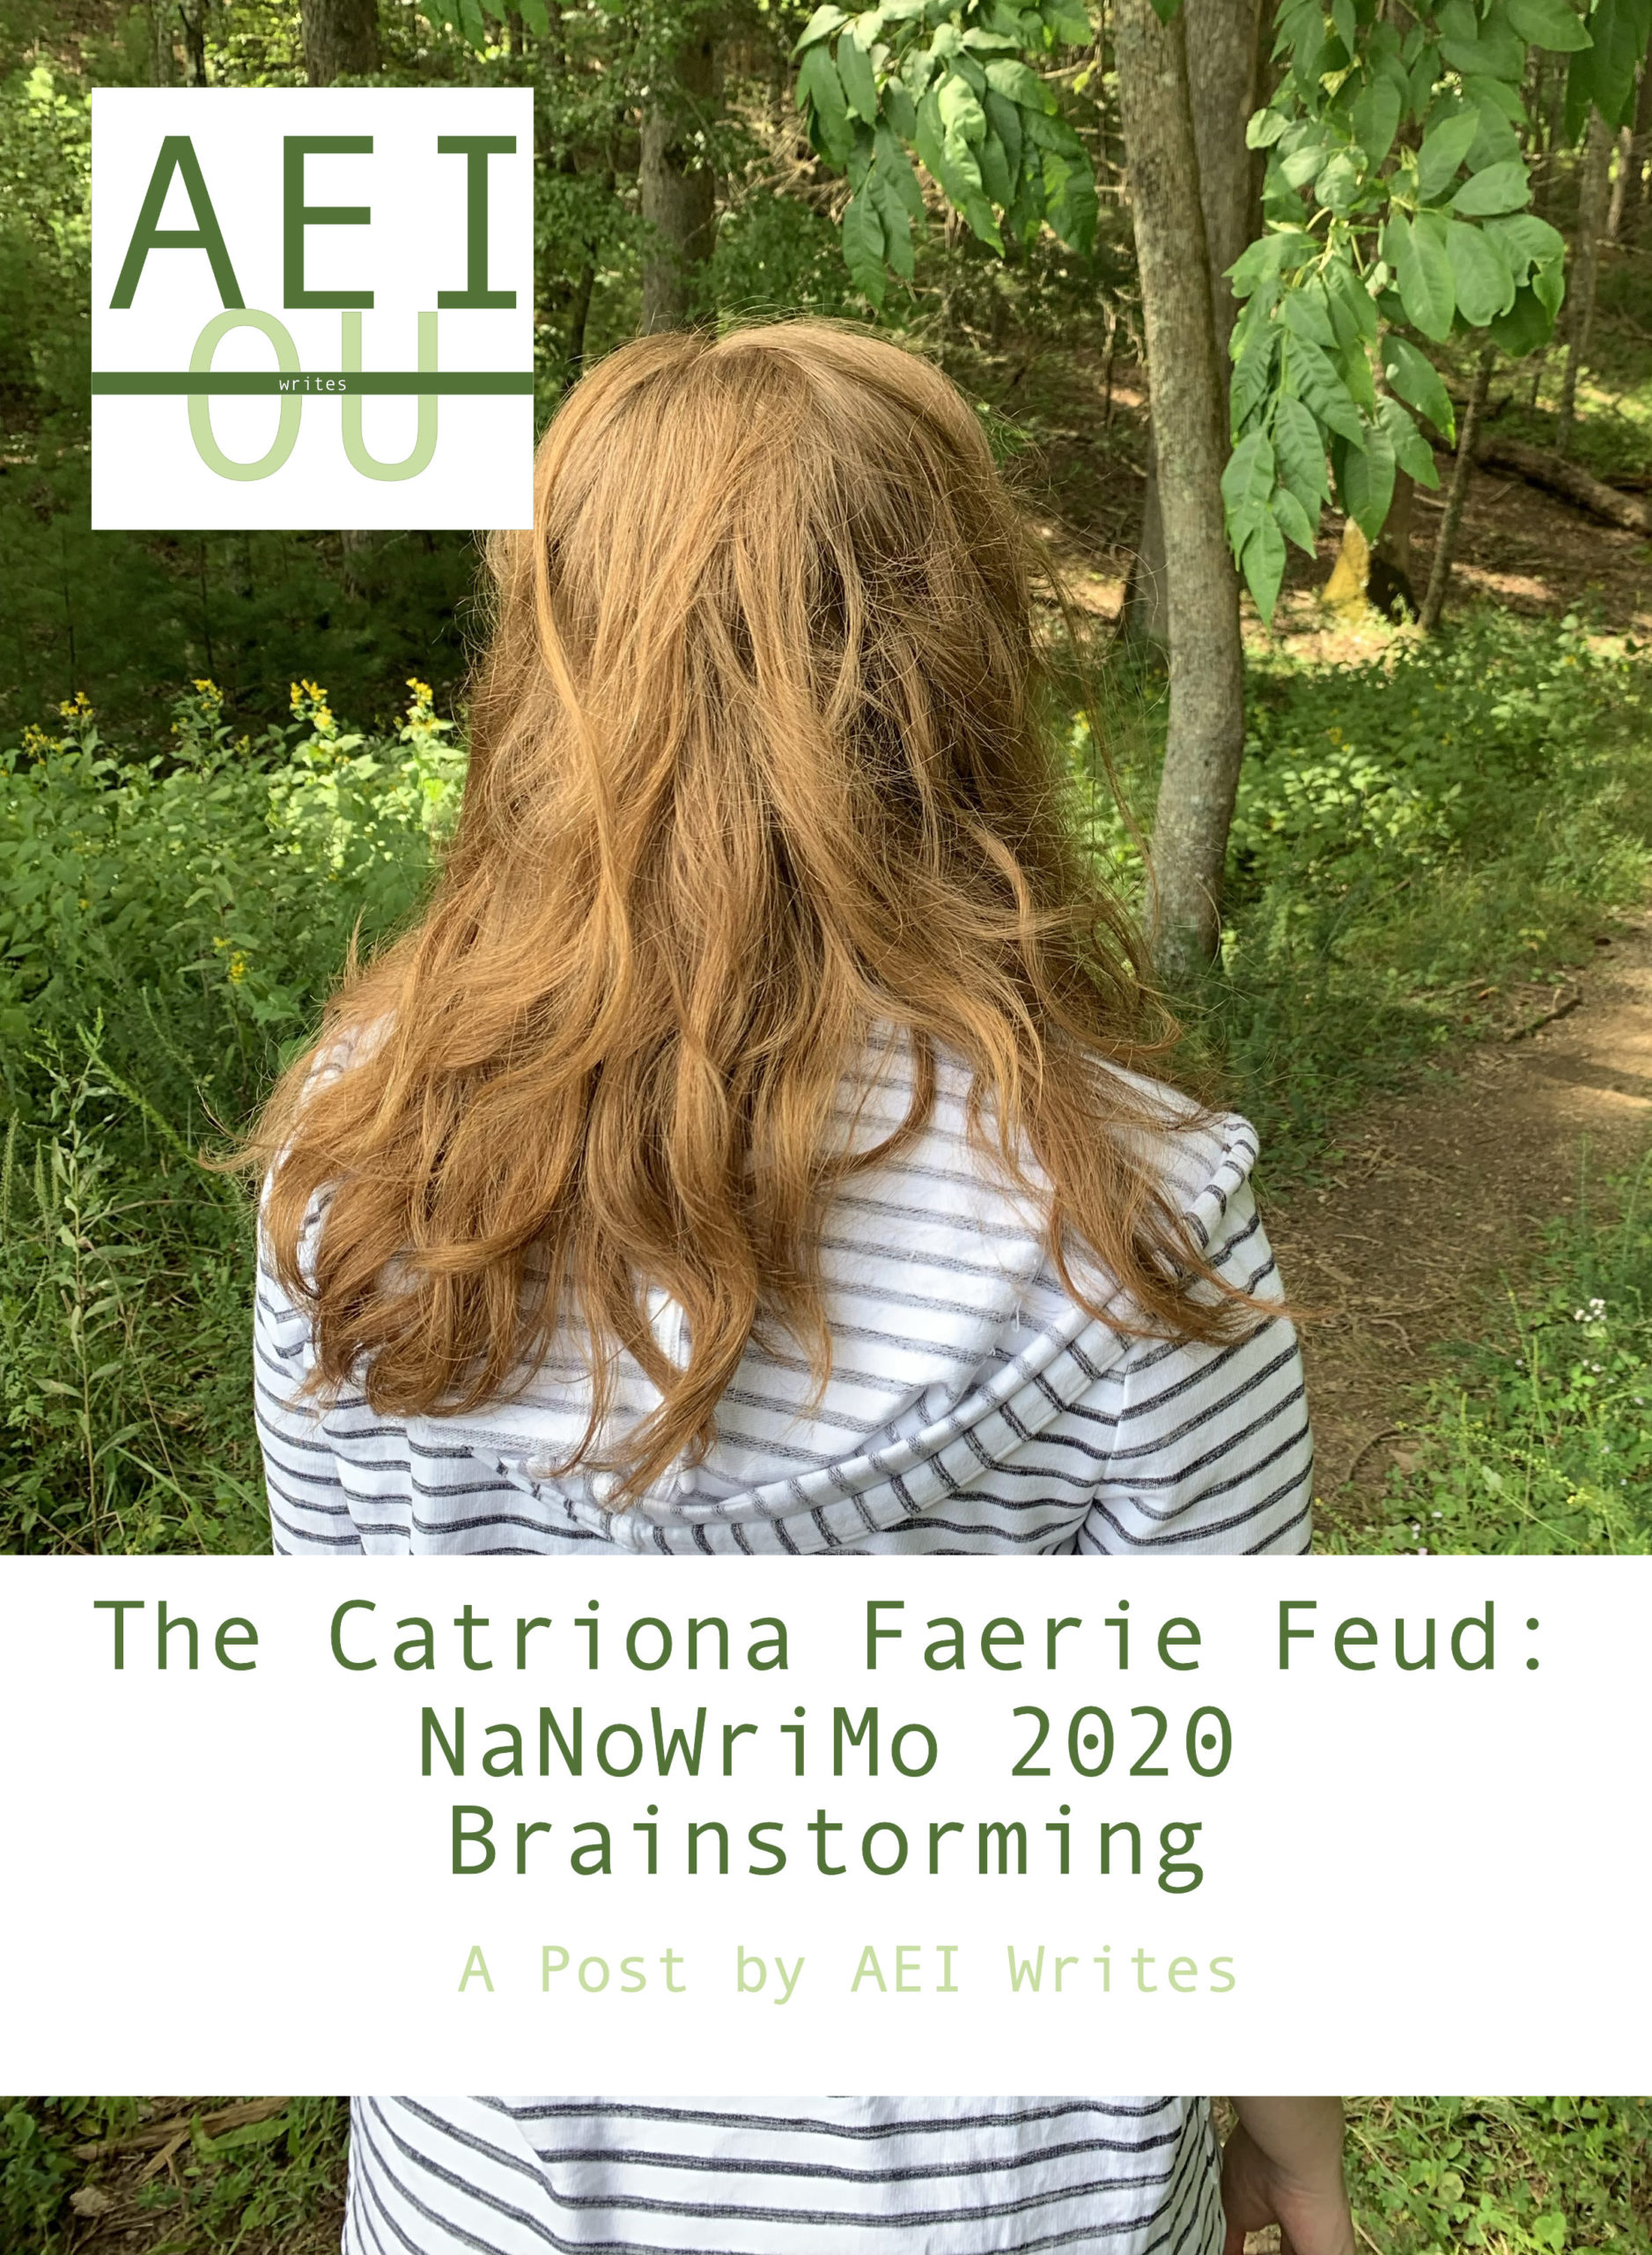 The Catriona Faerie Feud: NaNoWriMo 2020 Brainstorming